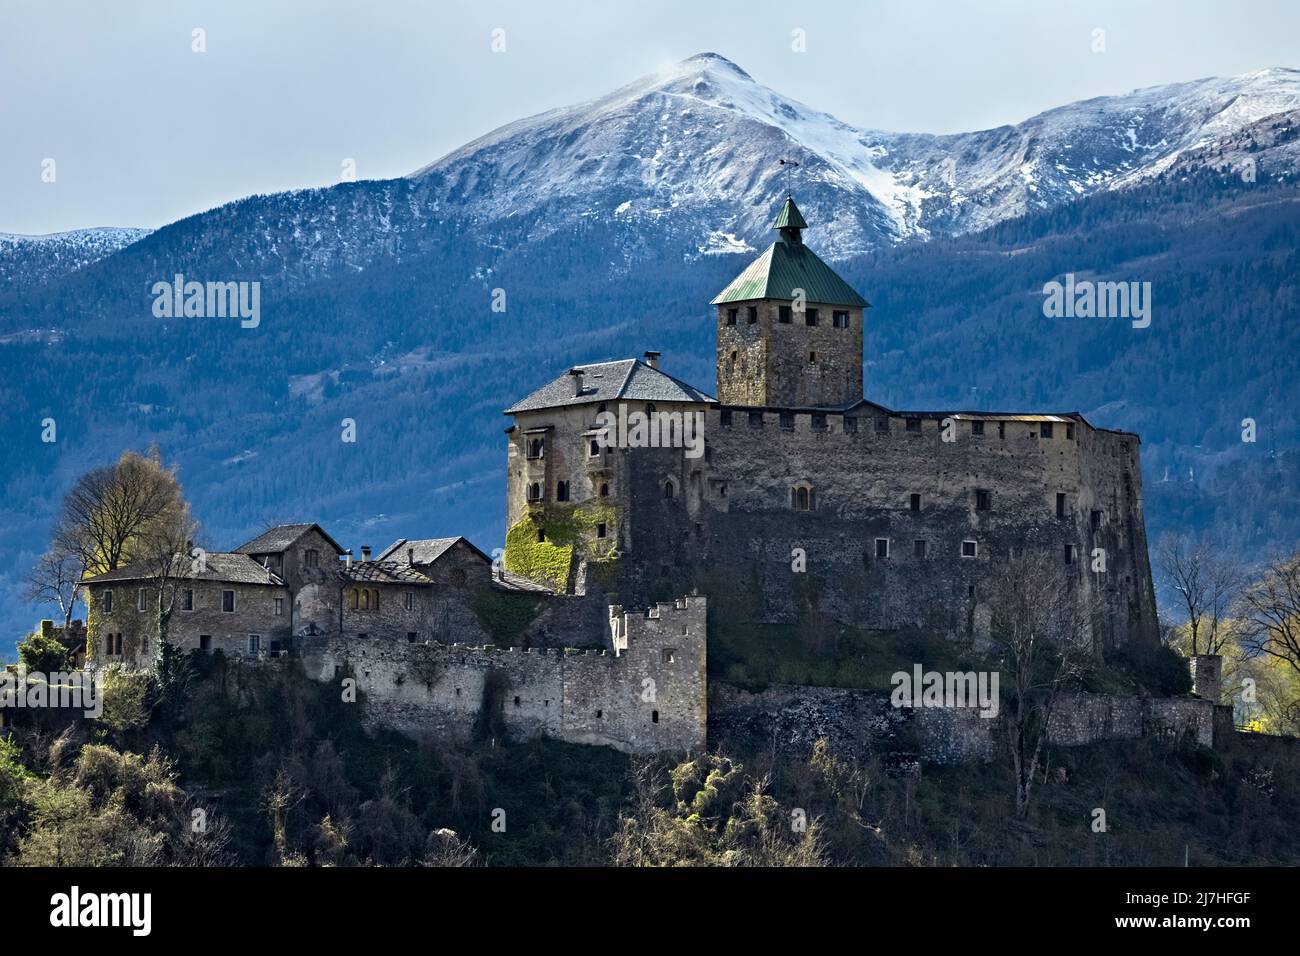 The imposing fortified structure of Ivano castle stands out among the Valsugana mountains. Castel Ivano, Trento province, Trentino Alto-Adige, Italy. Stock Photo